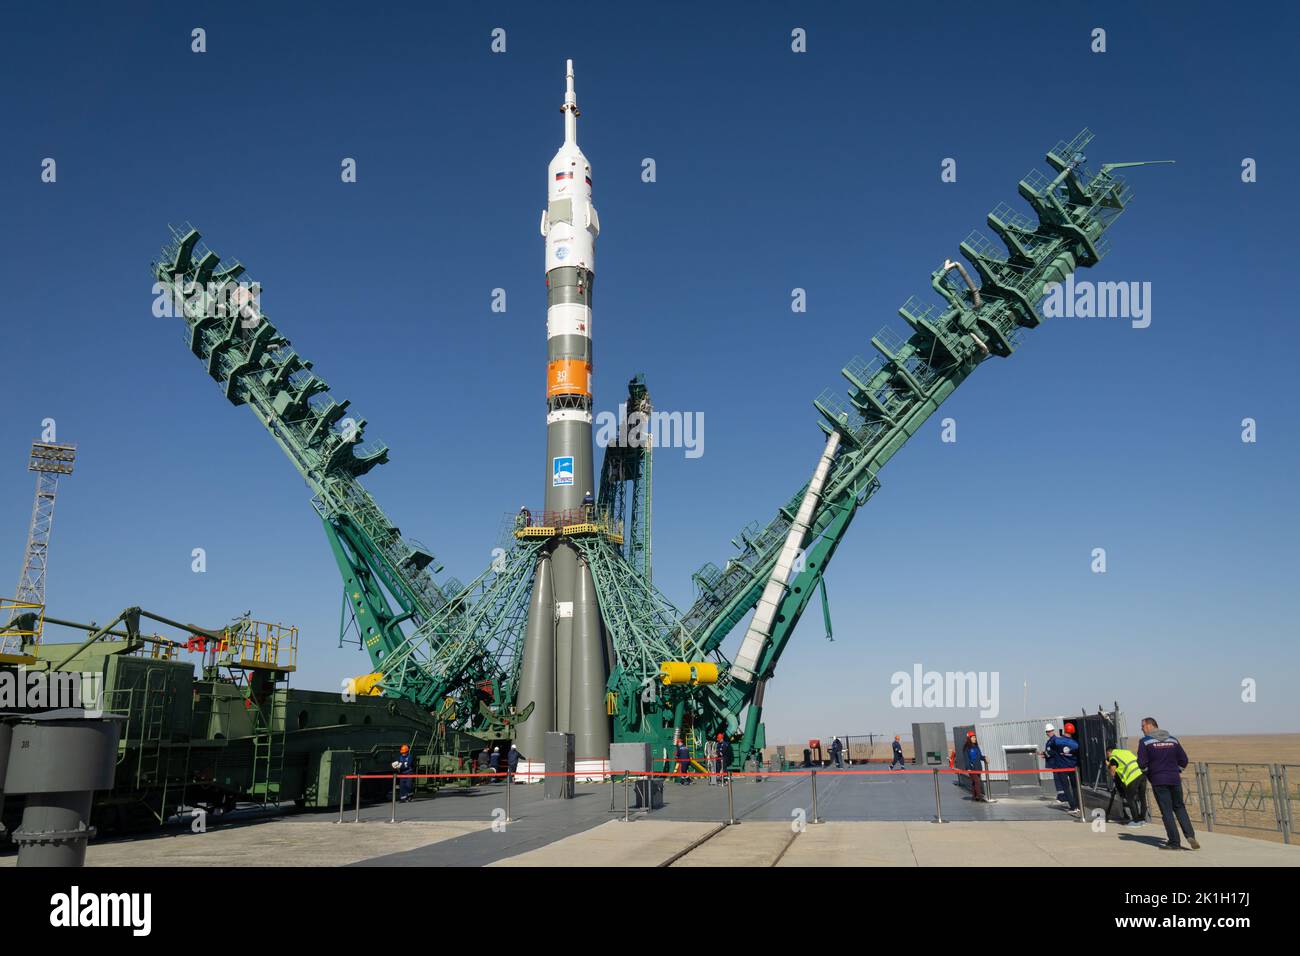 Baikonur, Kazakhstan. 18th Sep, 2022. The service gantry is closed around the Russian Soyuz MS-22 spacecraft and booster rocket at launch pad 31 of the Baikonur Cosmodrome, September 18, 2022 in Baikonur, Kazakhstan. International Space Station Expedition 68 crew members astronaut Frank Rubio of NASA, and cosmonauts Sergey Prokopyev and Dmitri Petelin of Roscosmos are set to launch September 21st to the orbiting laboratory. Credit: Victor Zelentsov/NASA/Alamy Live News Stock Photo